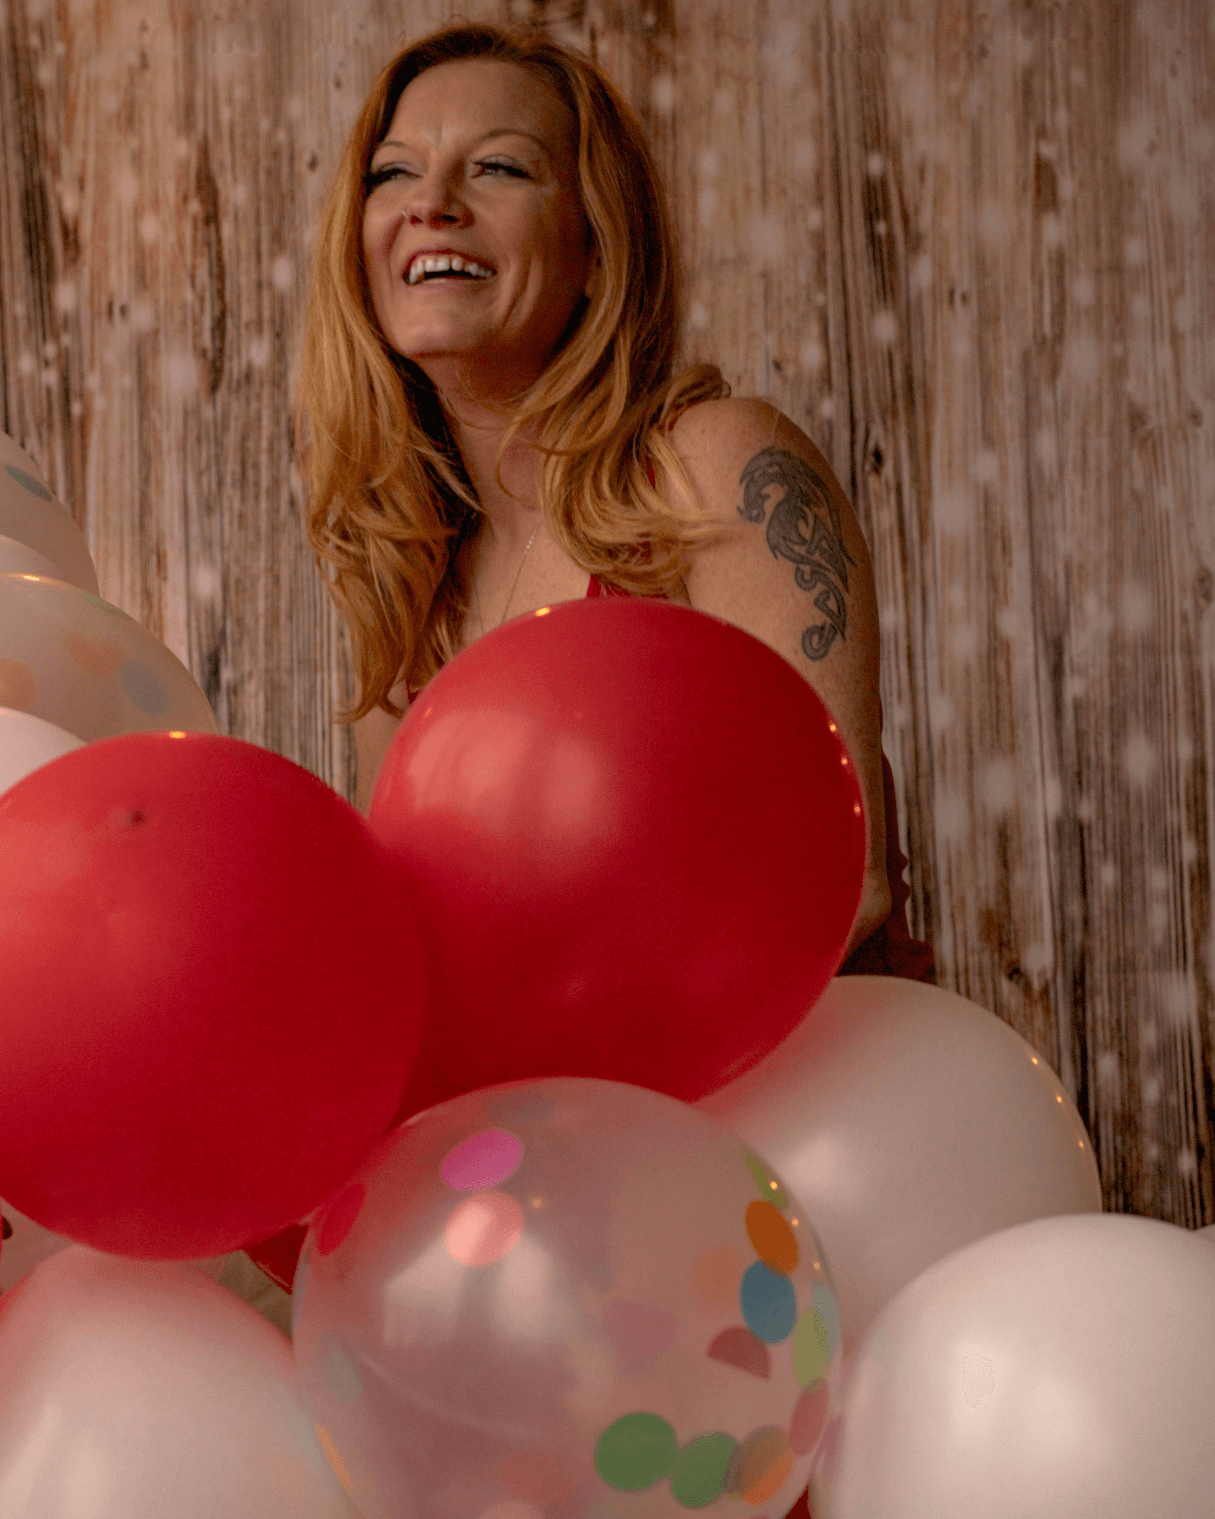 Woman in front of a wooden bokeh background smiling and 
surrounded by balloons